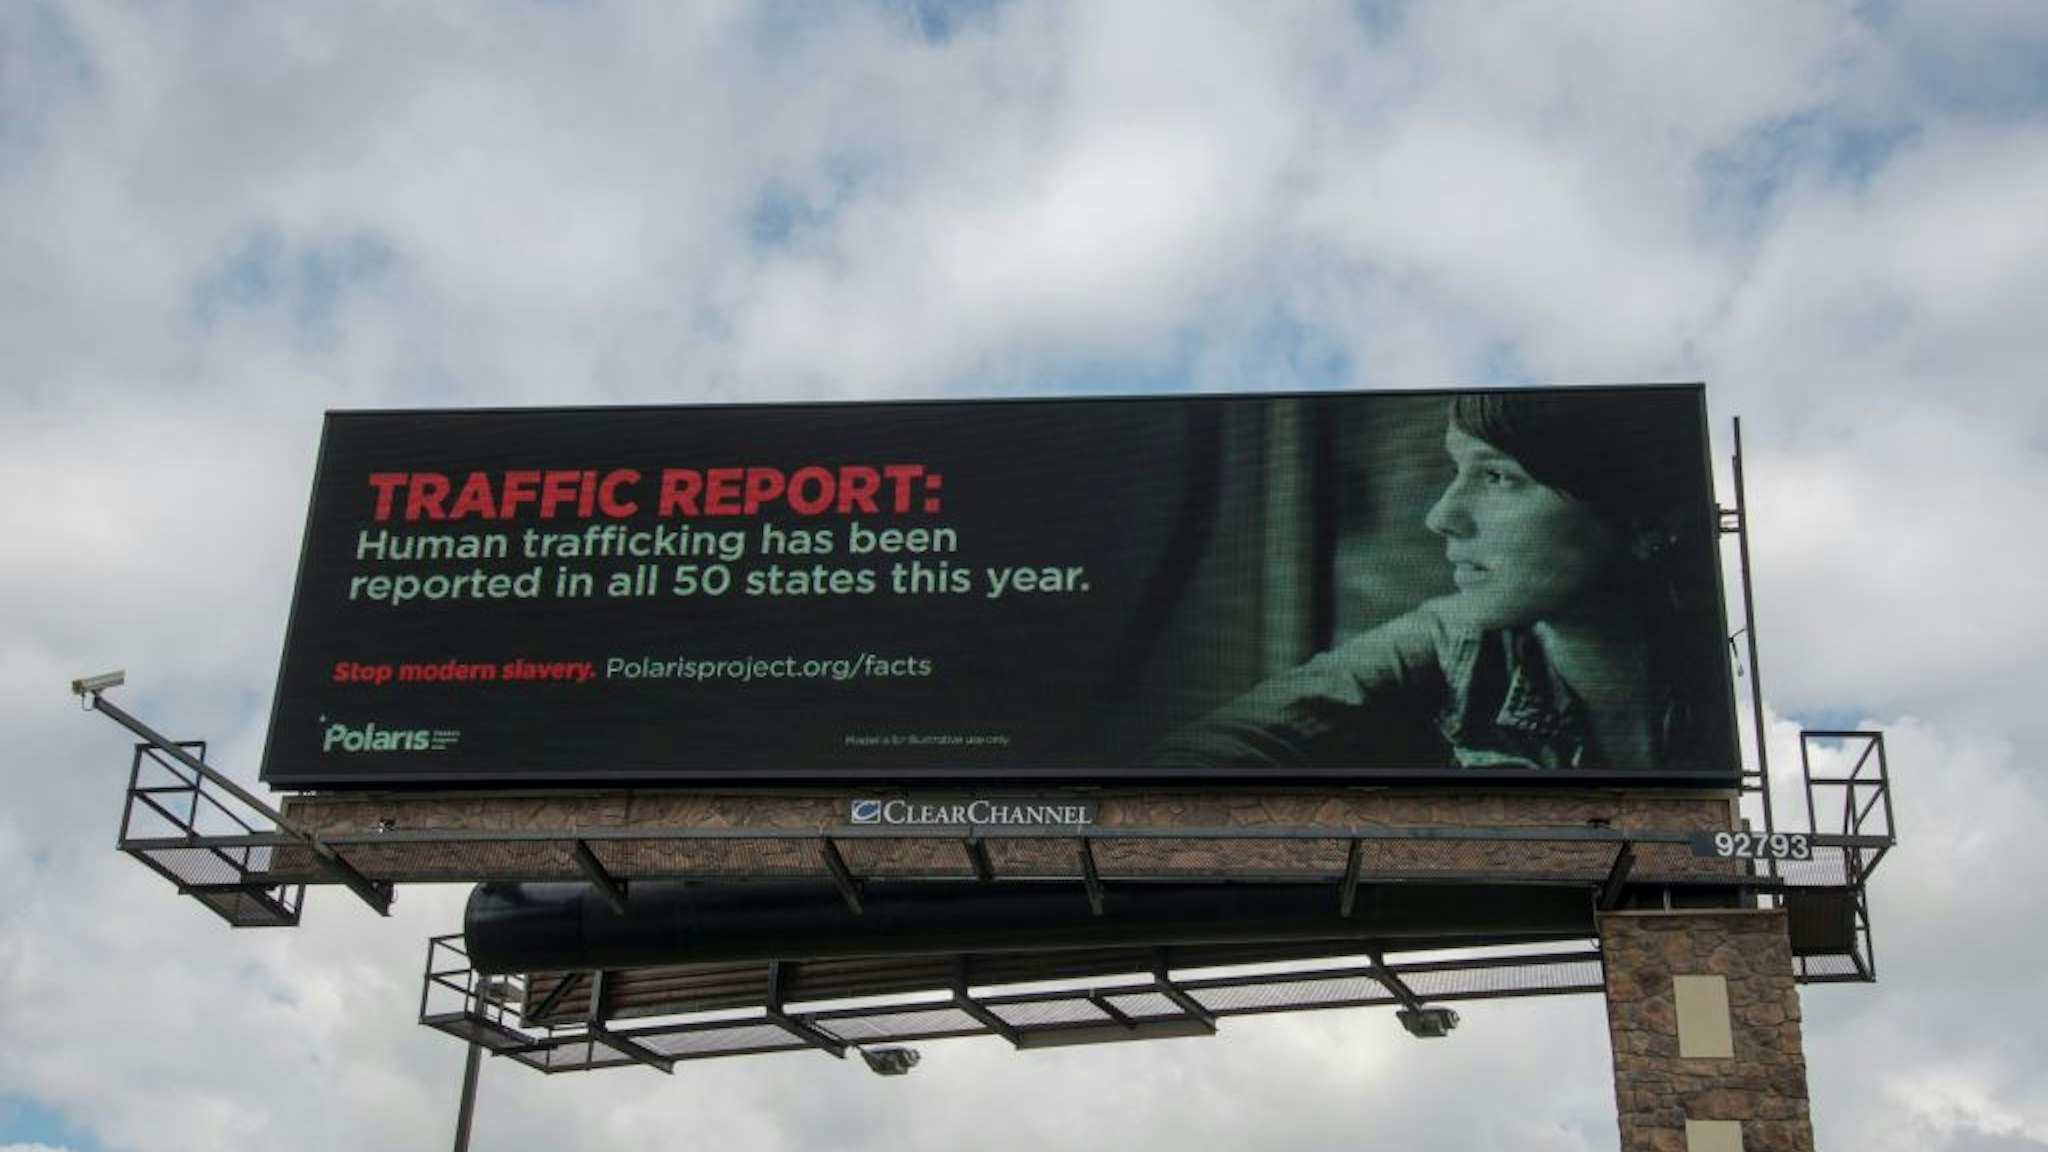 Mounds View, Minnesota, Anti-trafficking billboard put up by the National Human Trafficking Resource Center which is a national hotline and resource center serving victims and survivors of human trafficking. (Photo by: Education Images/Universal Images Group via Getty Images)